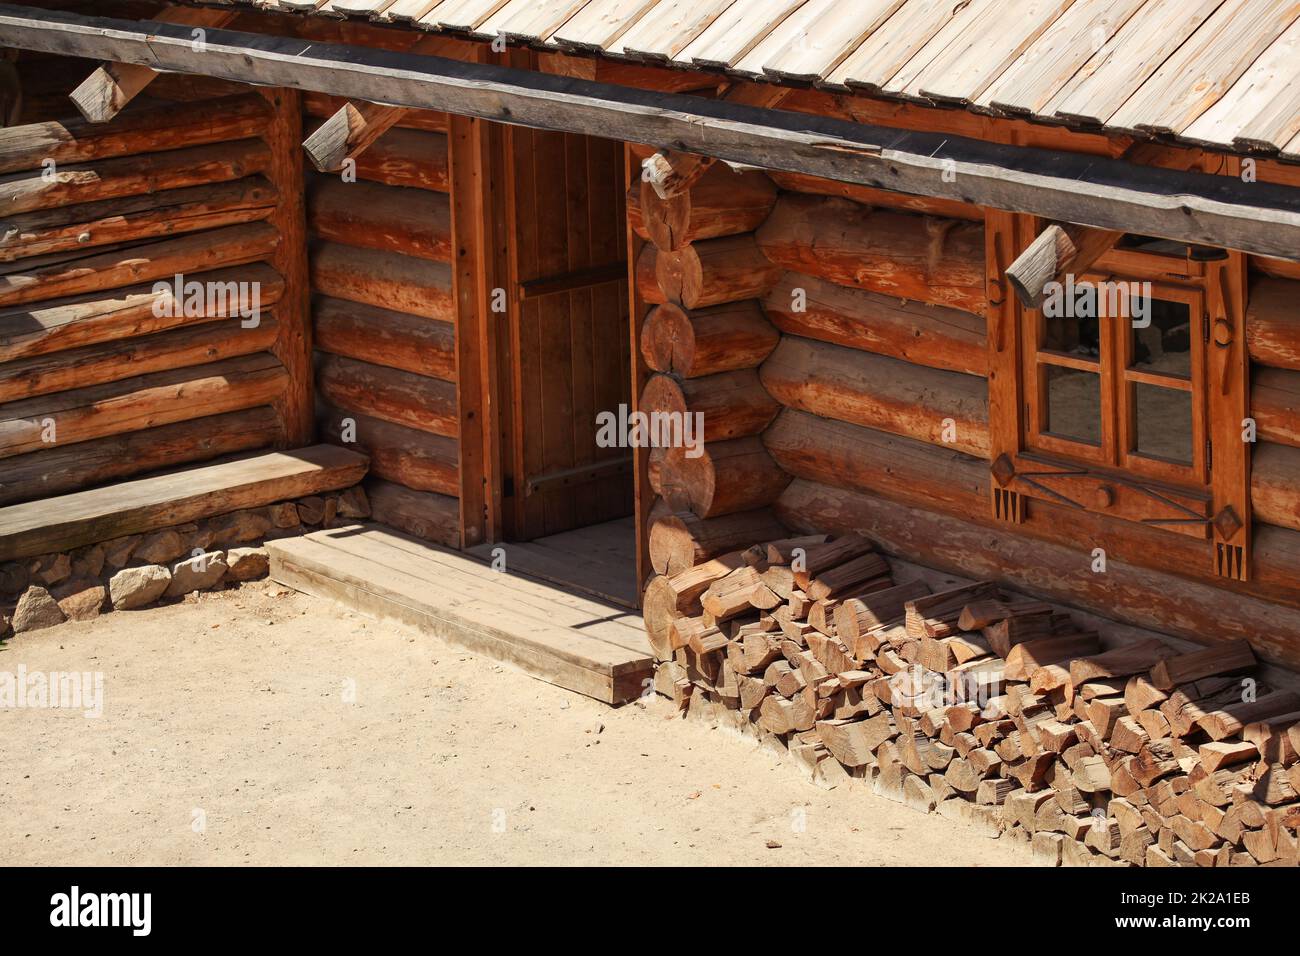 Wooden log cabin, lit by sun, detail on entrance door. Stock Photo